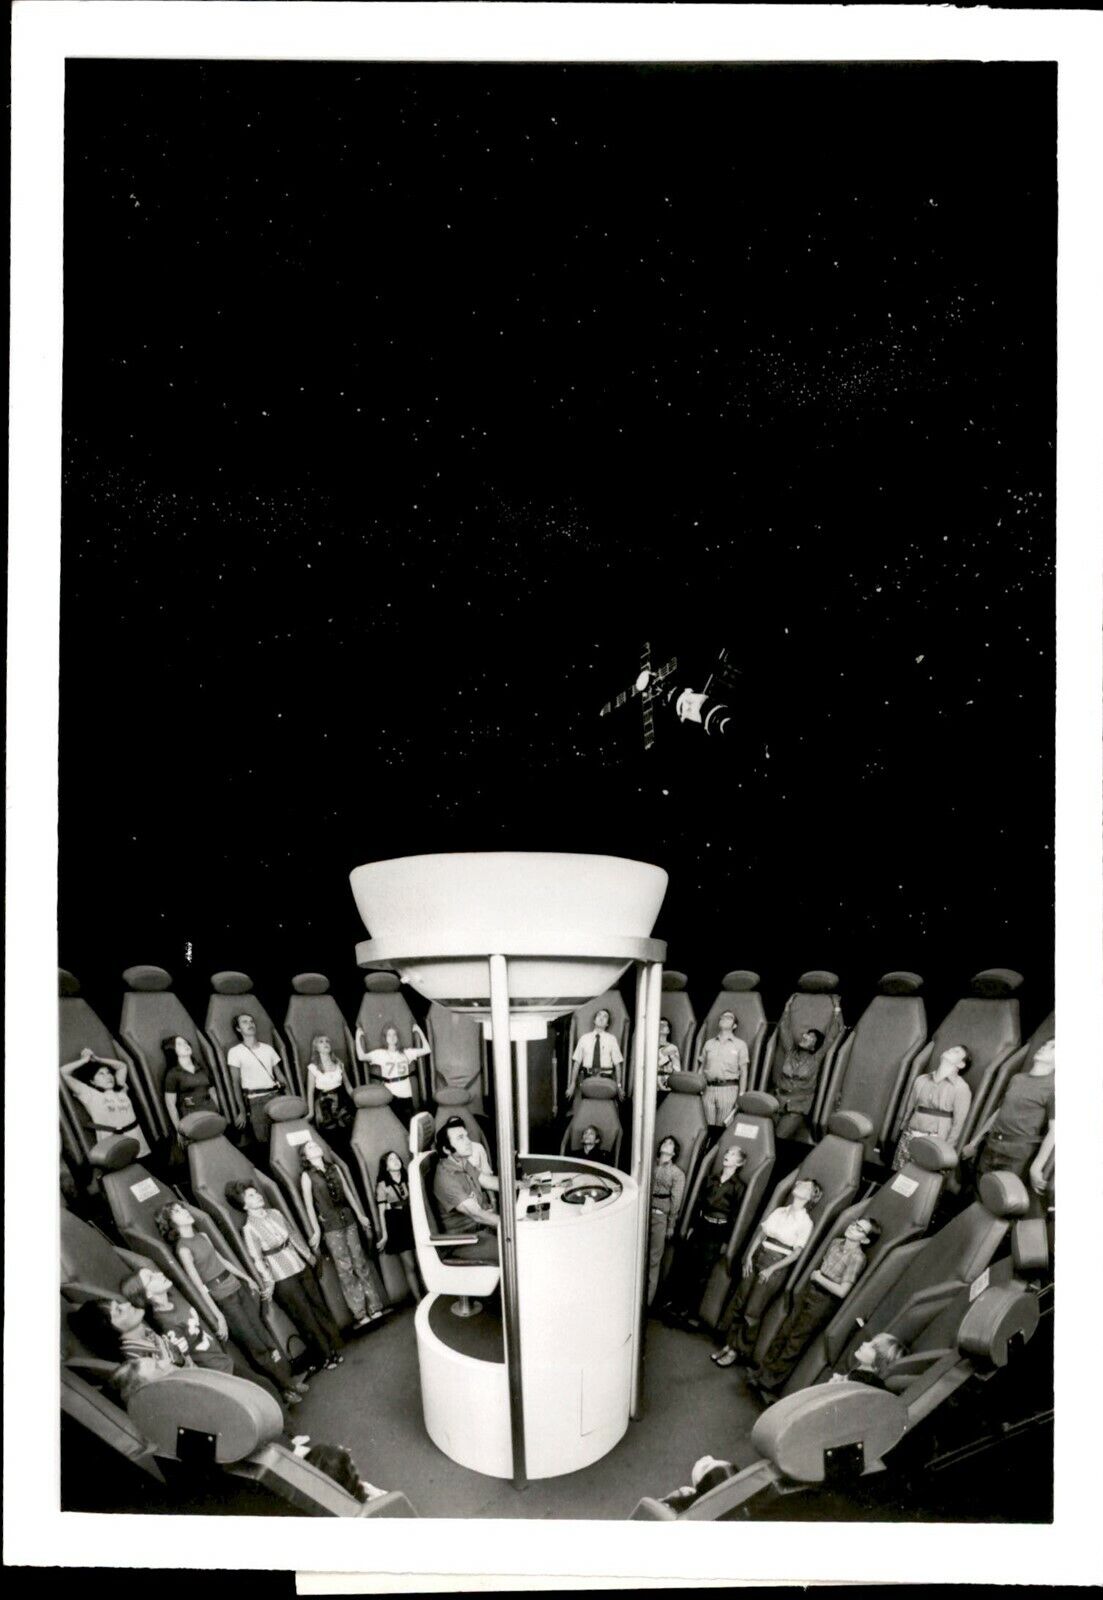 LD219 Orig Alan T Band Photo ALL ABOARD FOR SPACE FLIGHT Automated Rocket Ride